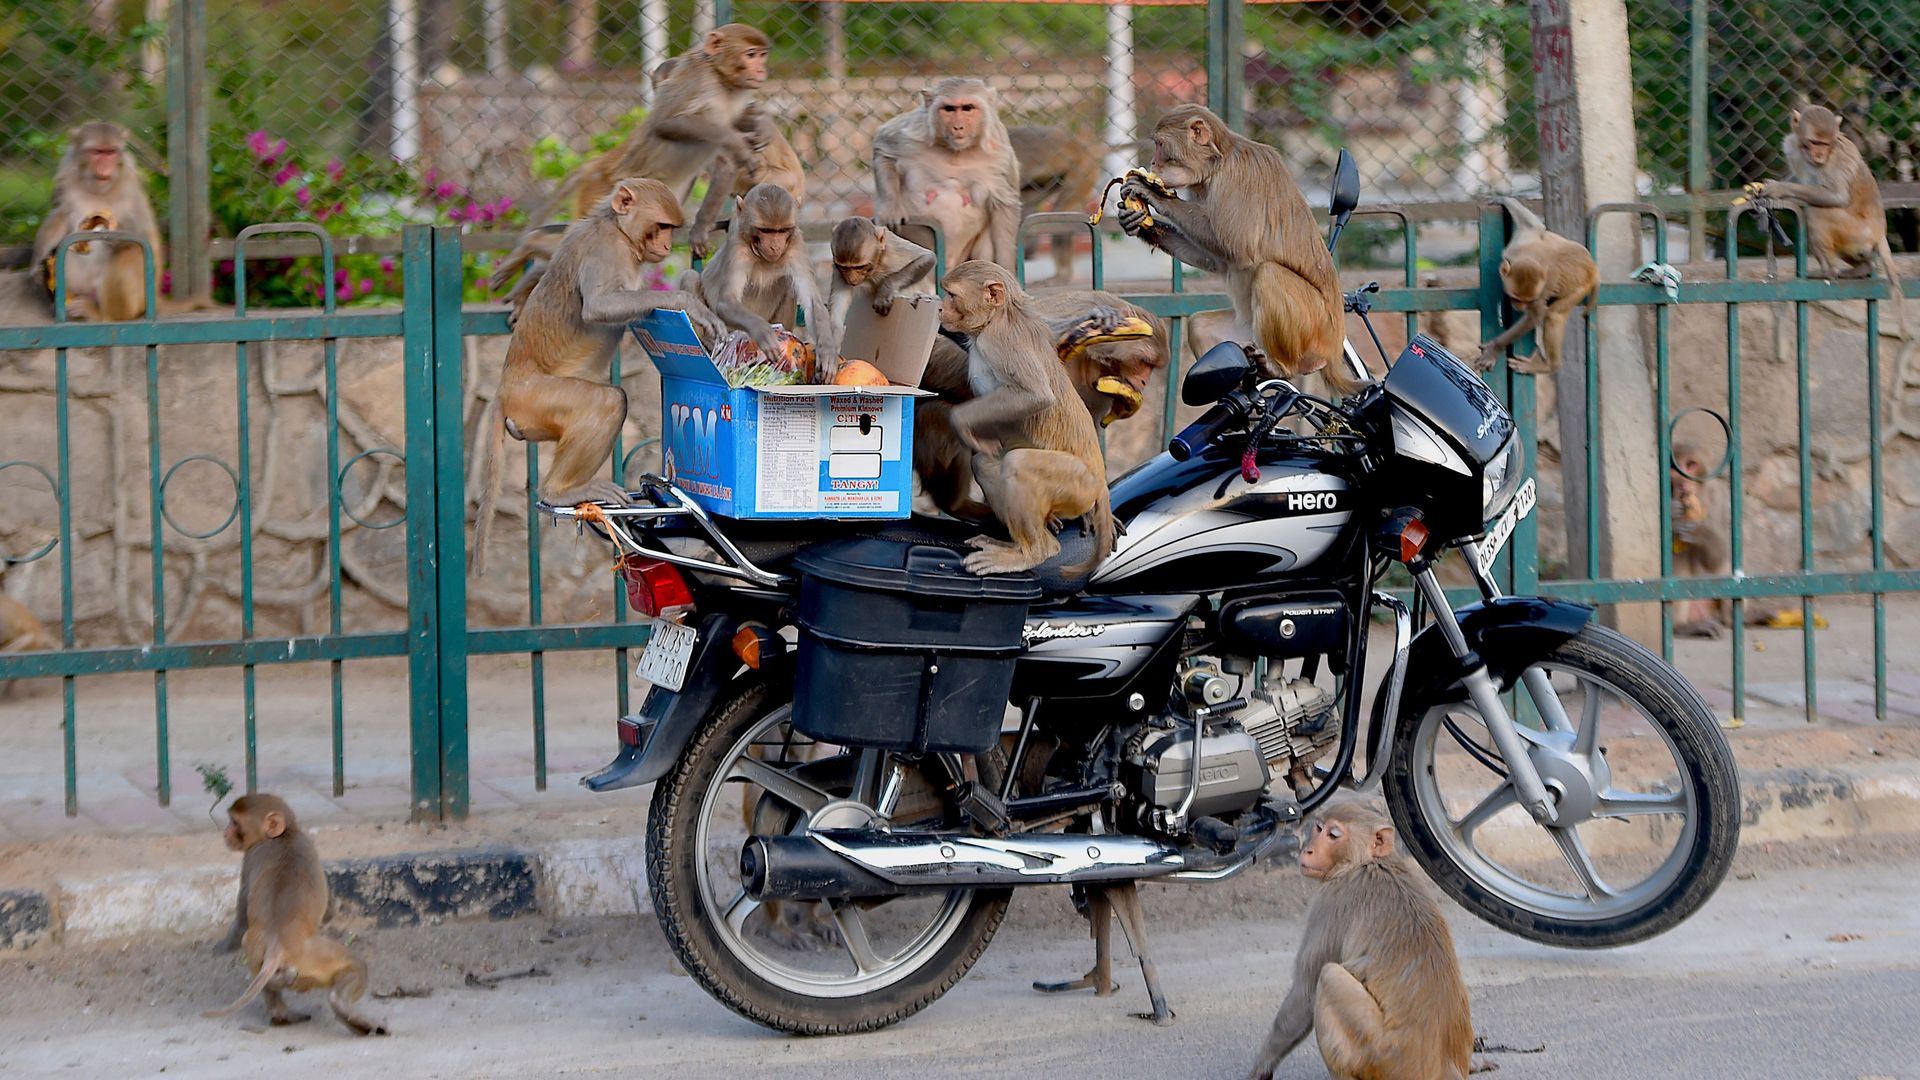 Monkeys get on a motorcycle to eat fruits from a box during a government-imposed nationwide lockdown